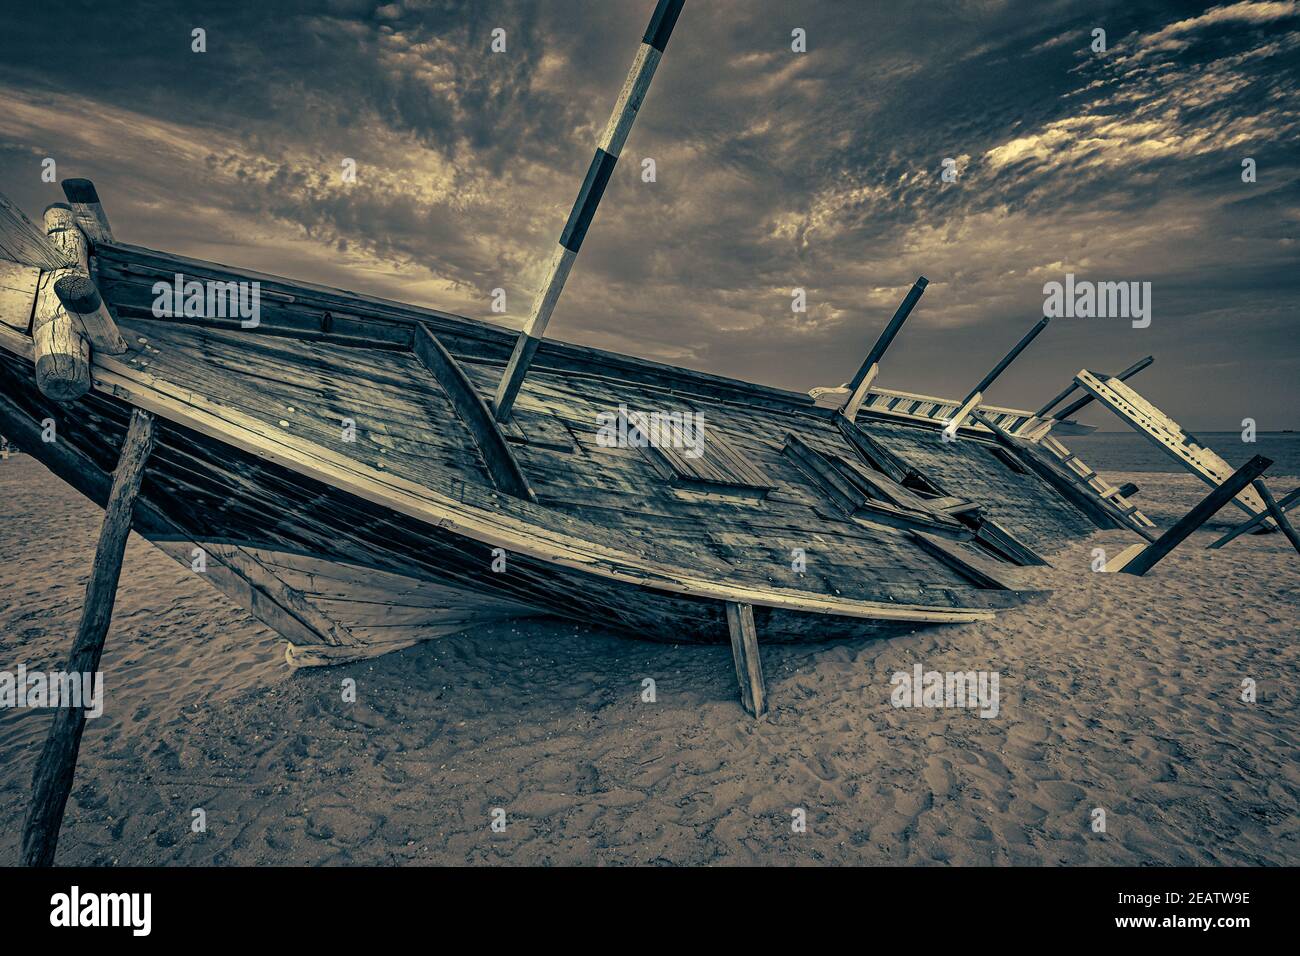 Old Arabic wooden boat (dhow) stranded on the beach black and white close up image with clouds in the sky Stock Photo